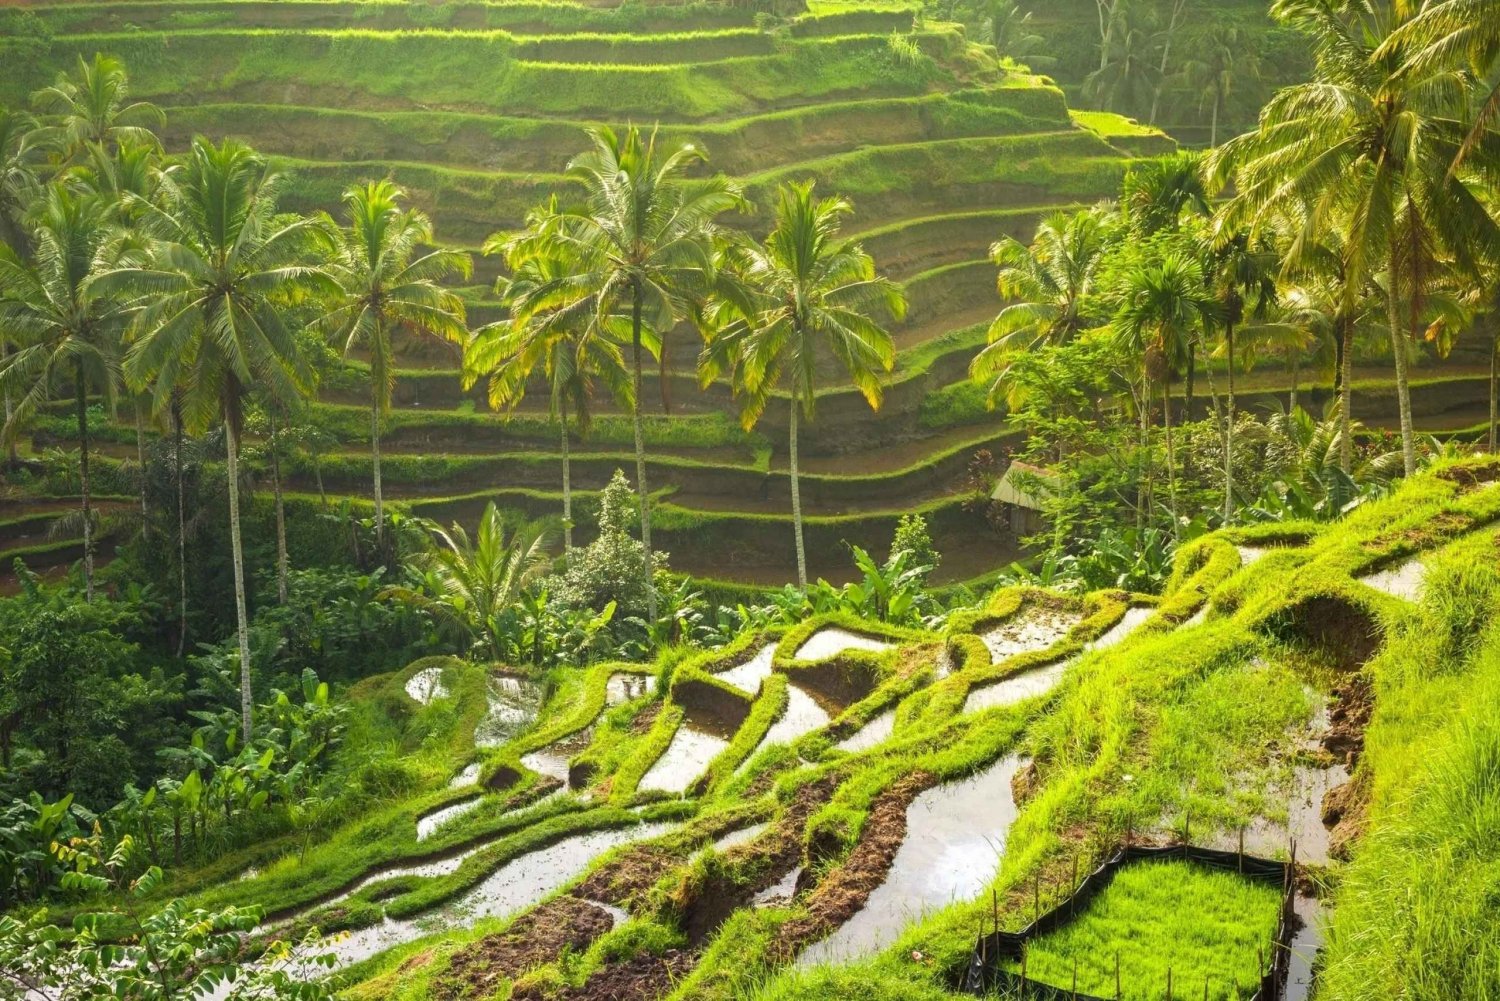 Ubud Monkey Forest, Rice Terrace, Temple and Jungle Swing